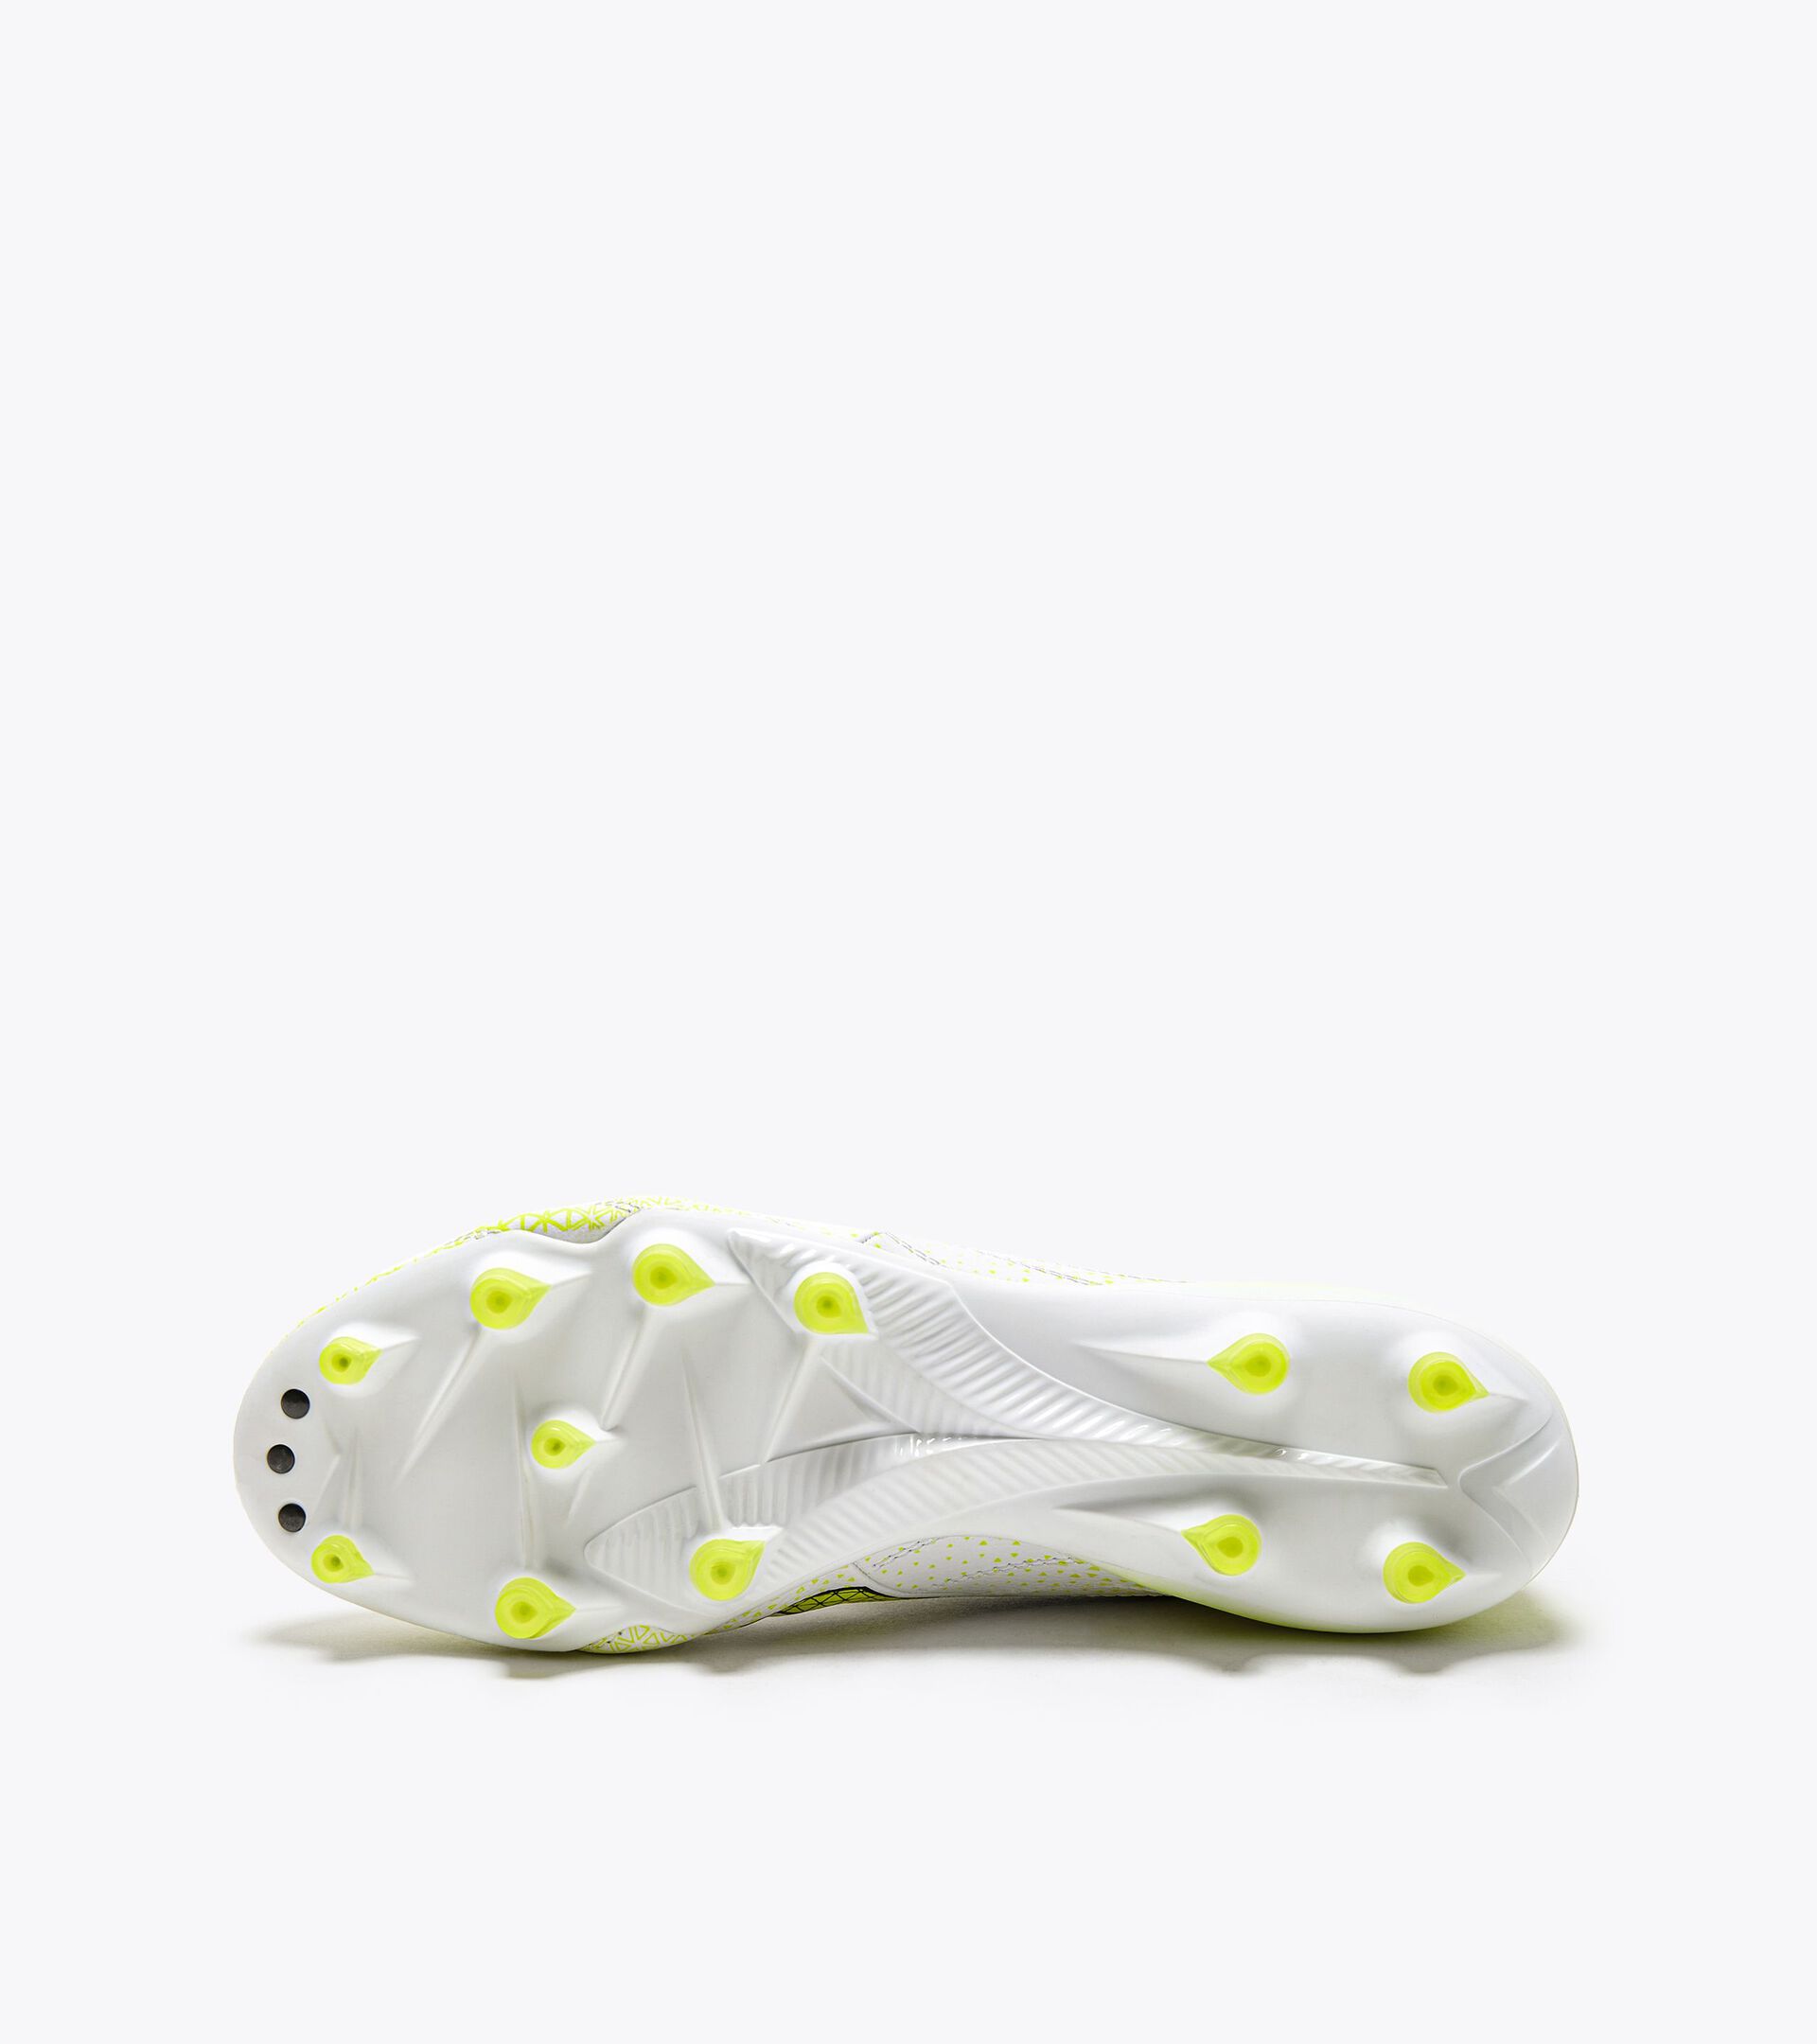 Calcio boots for firm grounds - Made in Italy - Gender Neutral BRASIL ELITE TECH GR ITA LPX WHITE/BLACK/FLUO YELLOW DD - Diadora